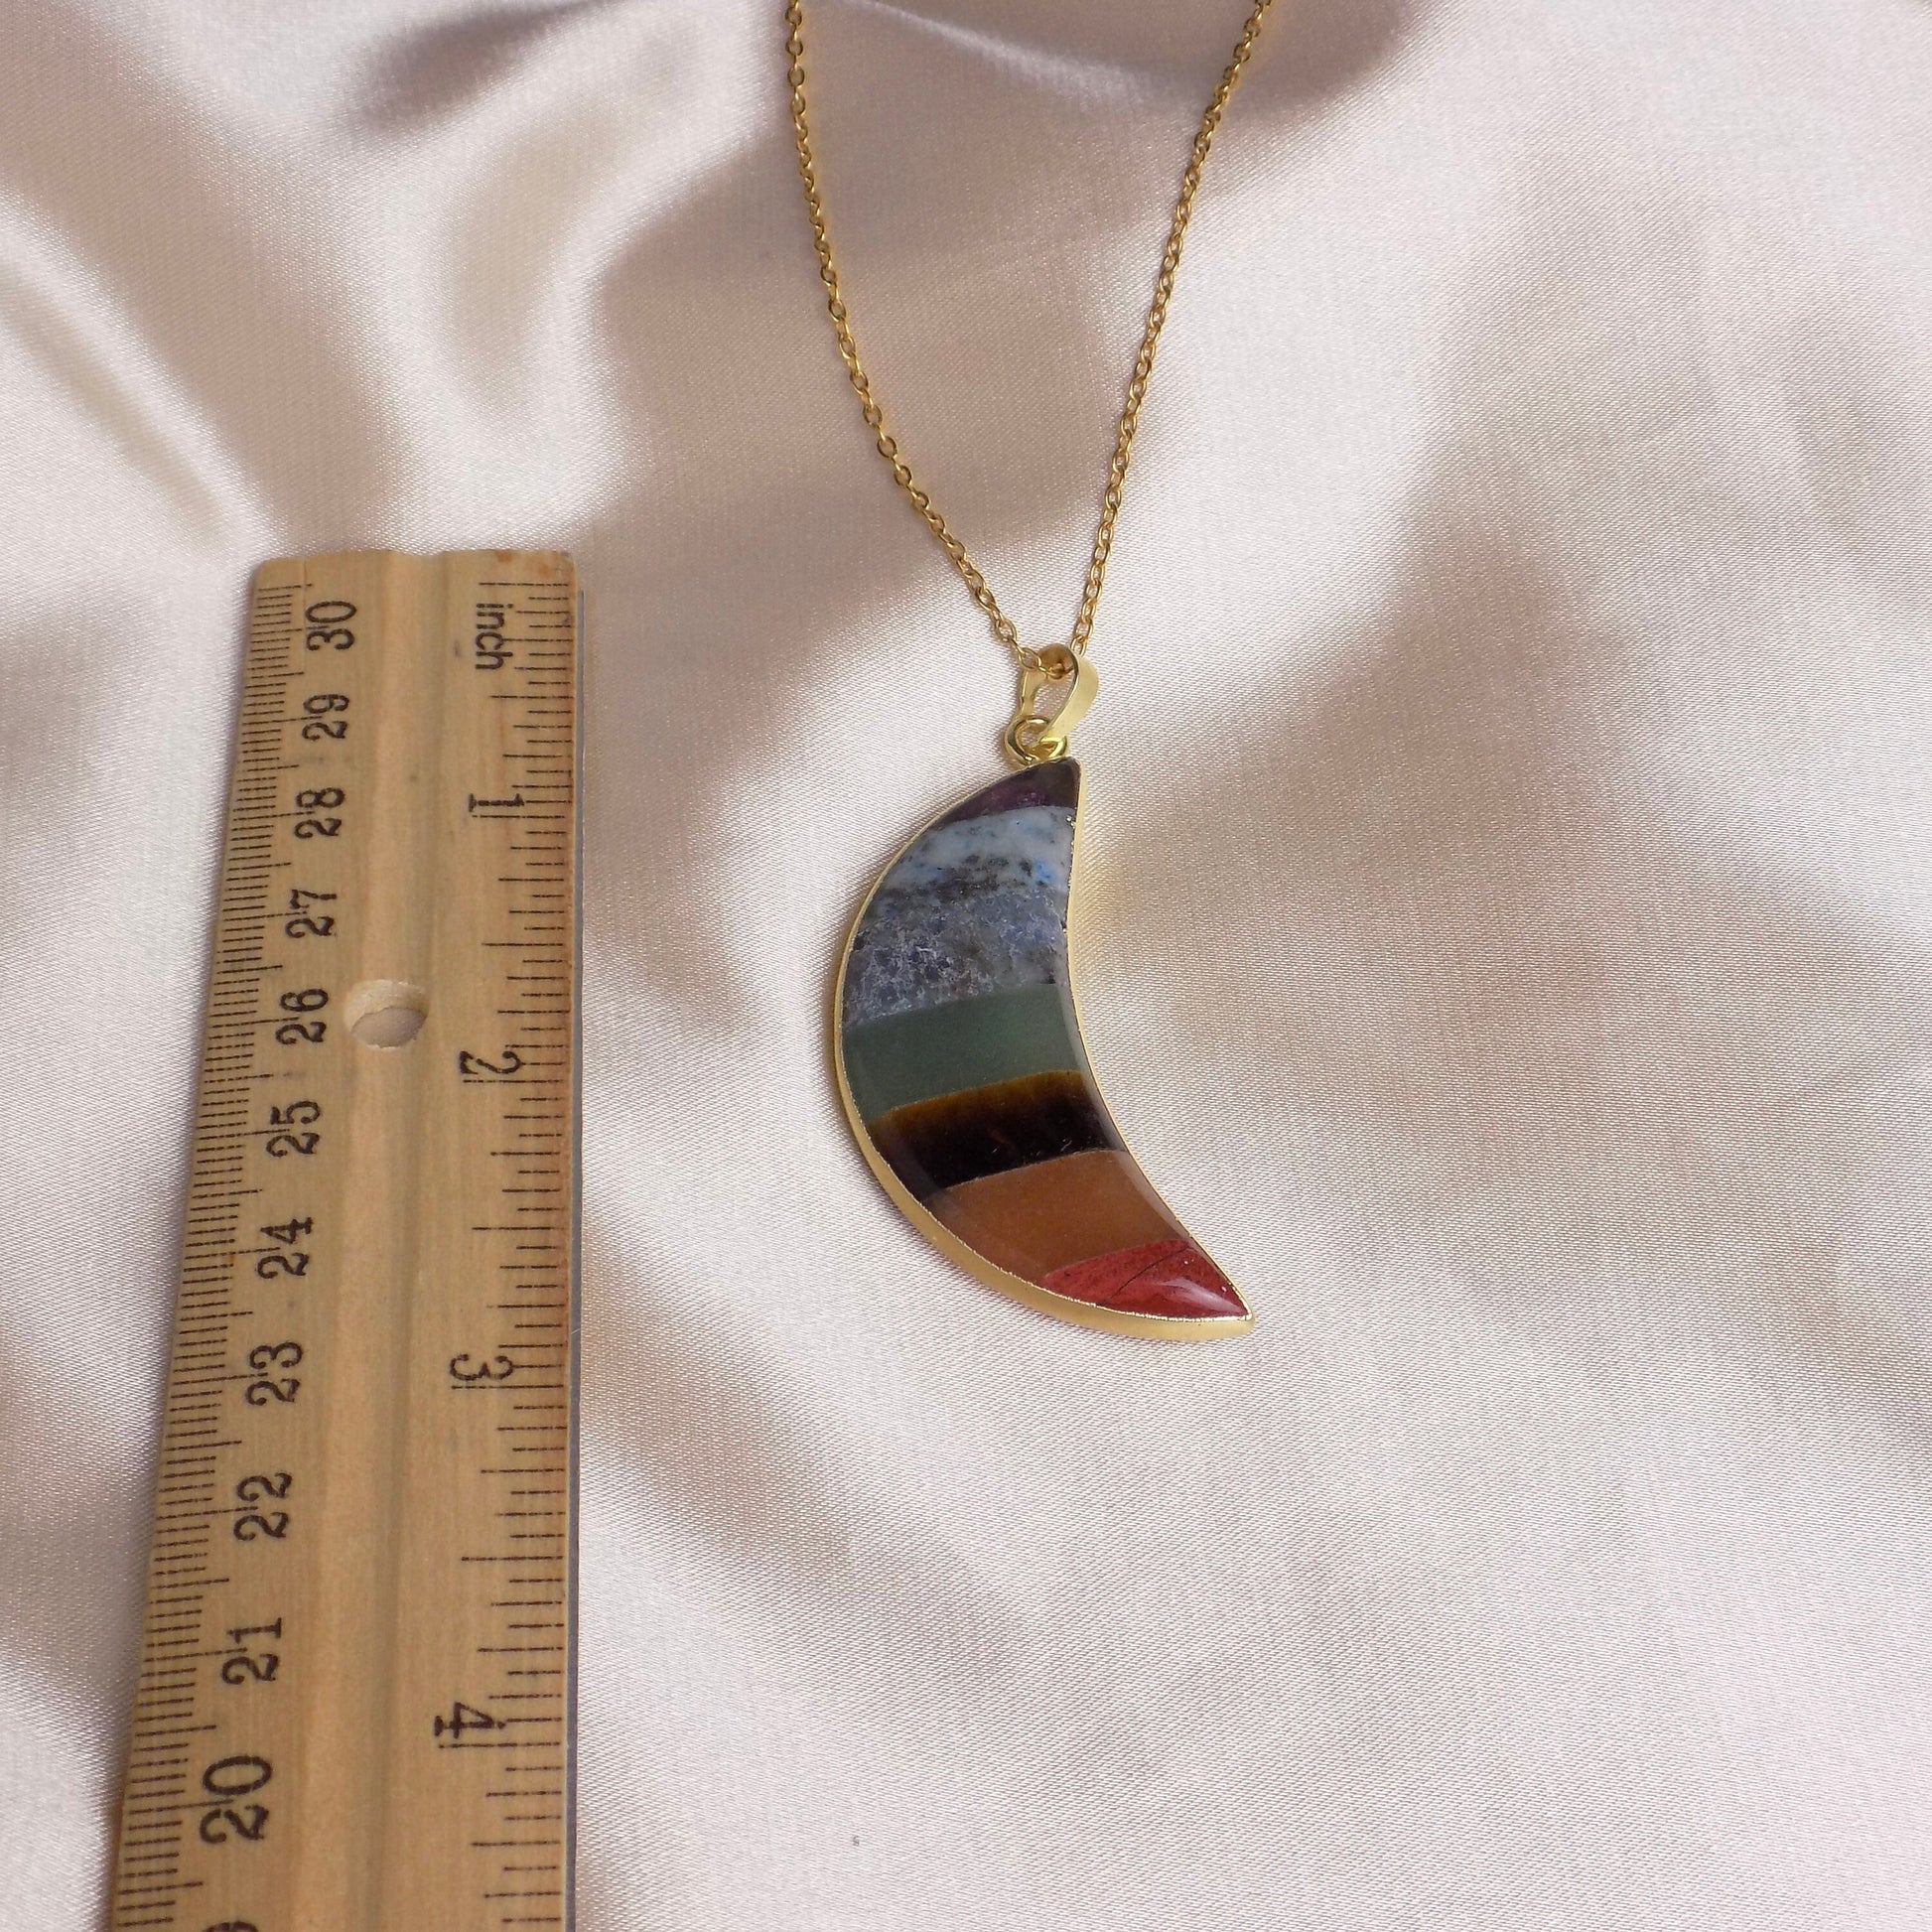 Seven Chakra Crystal Necklace Gold, Large Crescent Moon Necklace Boho Layer, Gift Women, M7-26